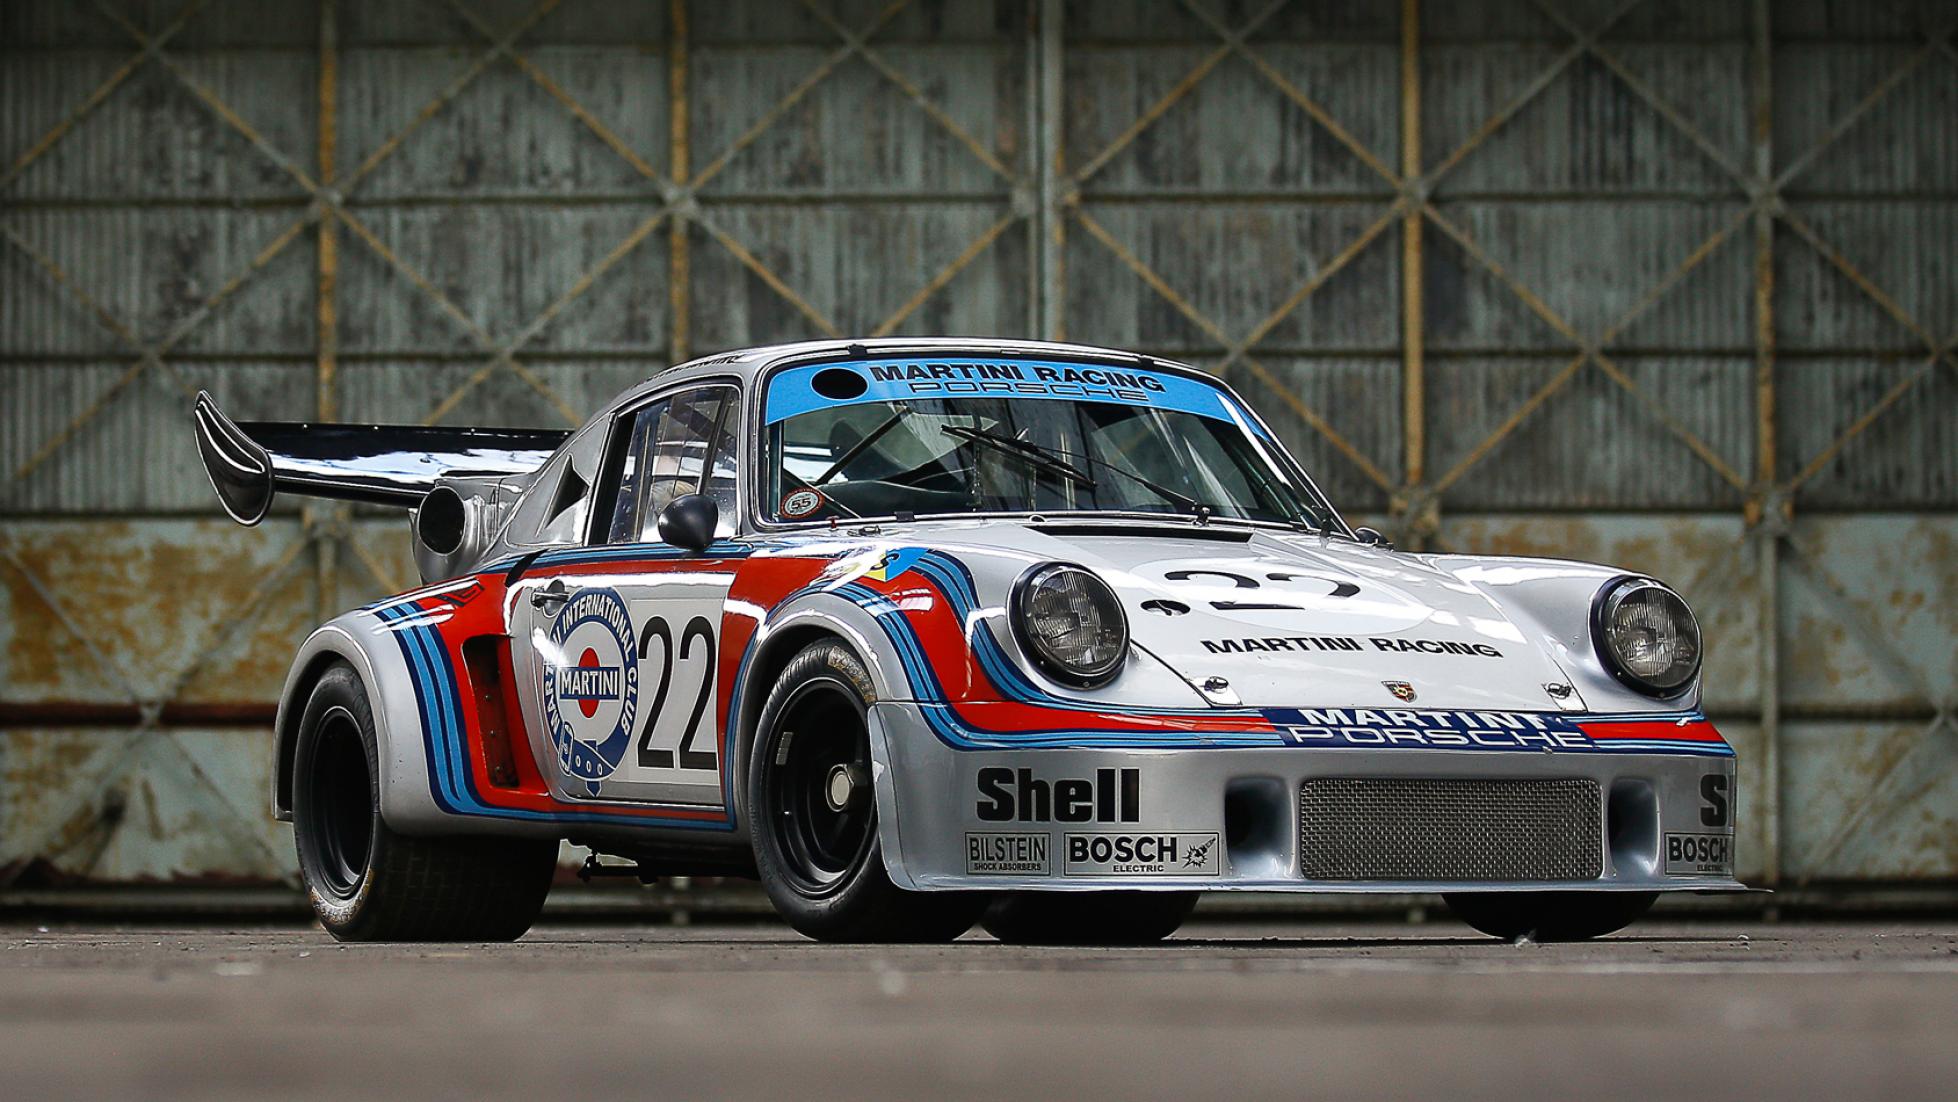 Discover 53+ images old porsche race car - In.thptnganamst.edu.vn